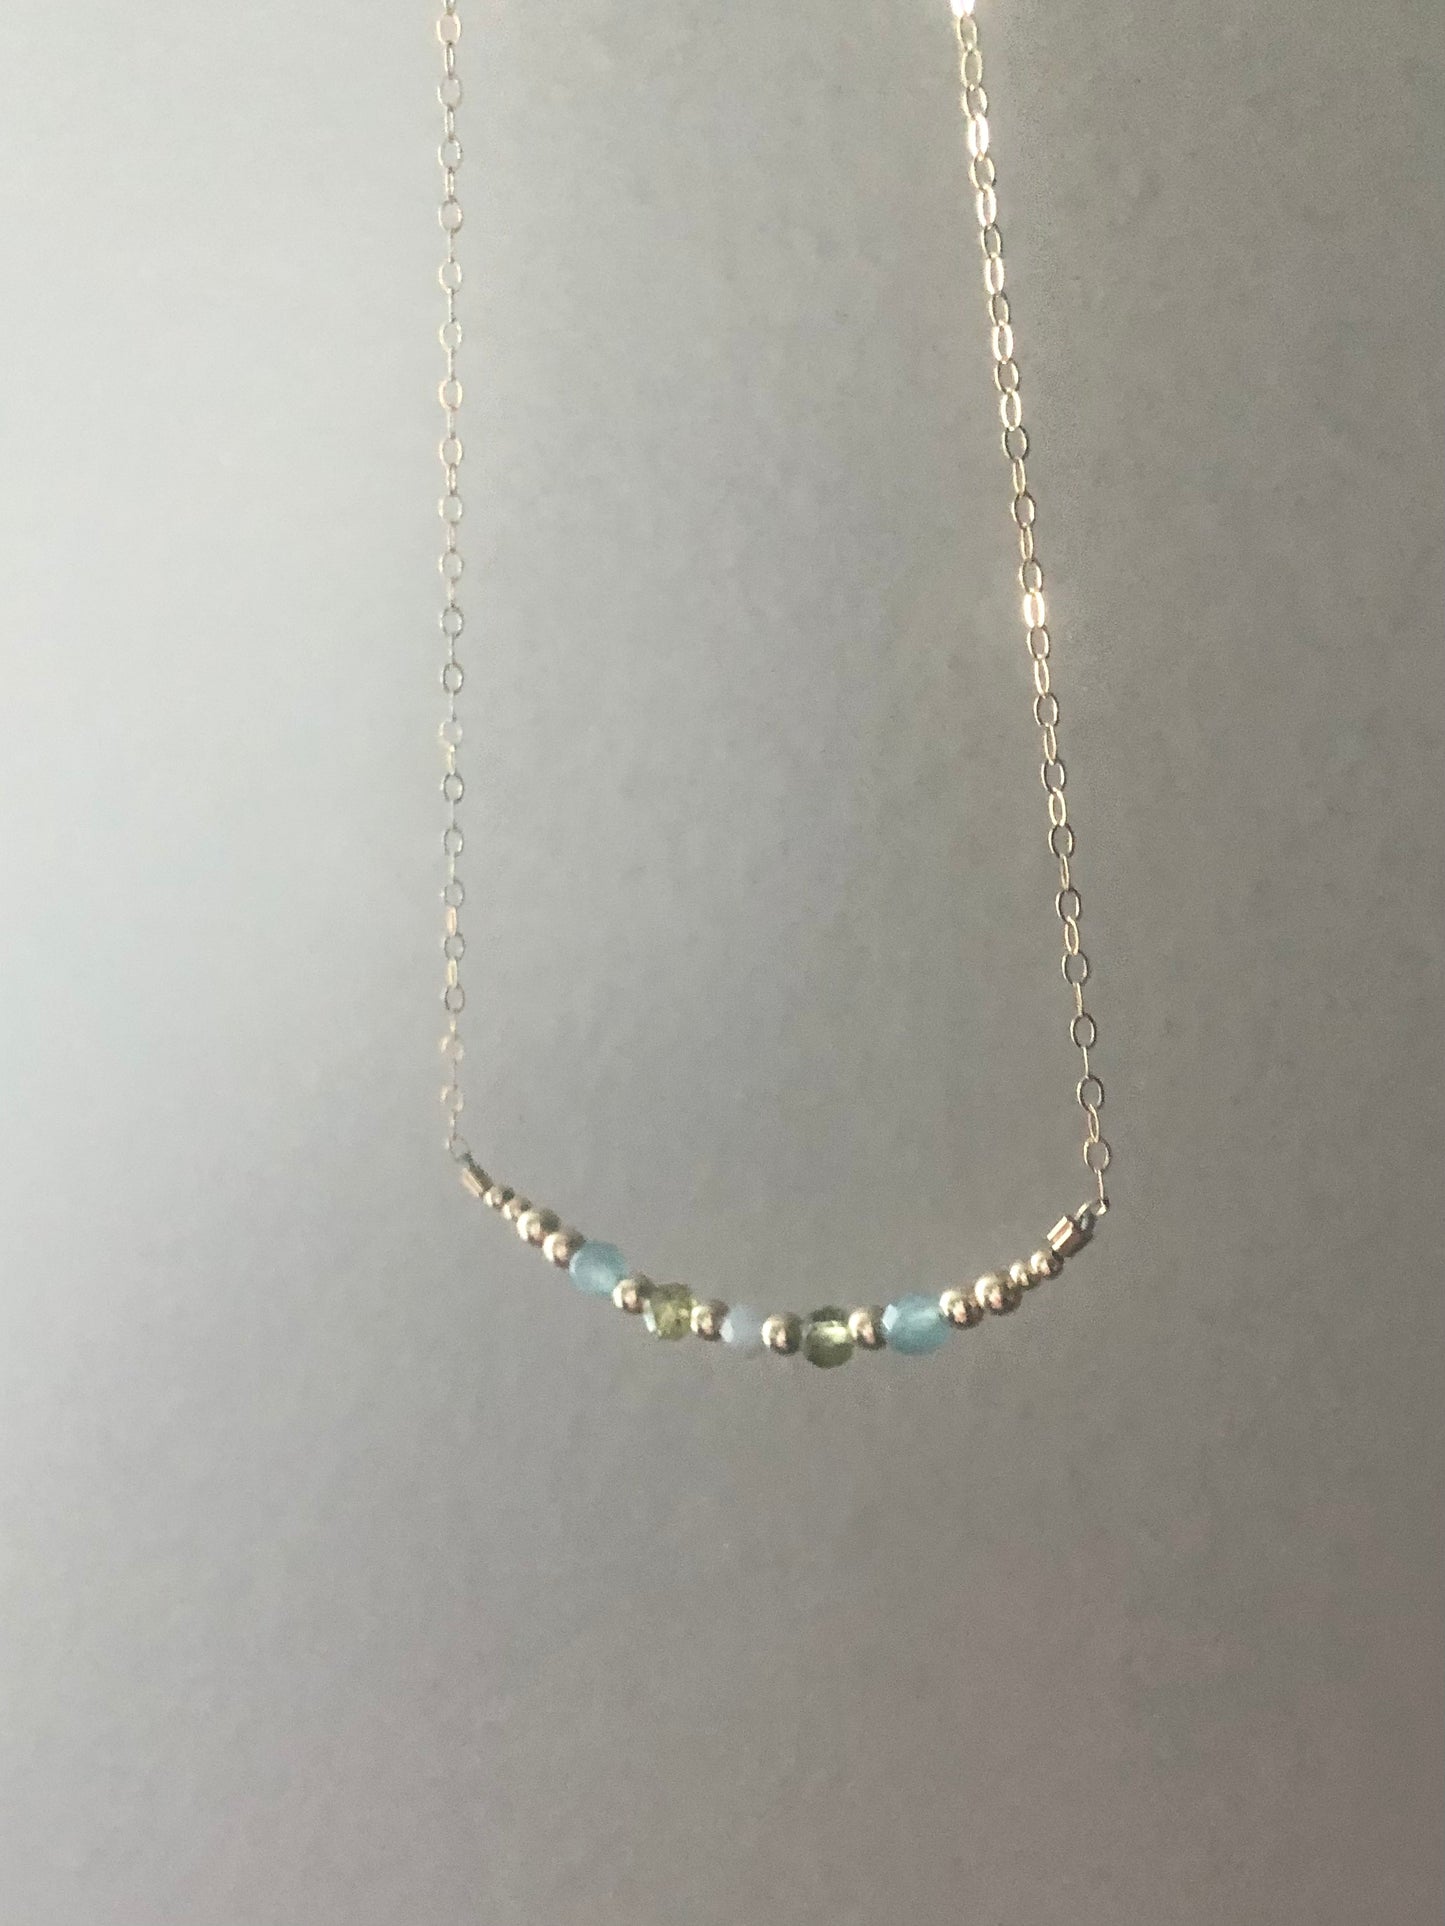 Birthstone Necklace in Gold or Silver